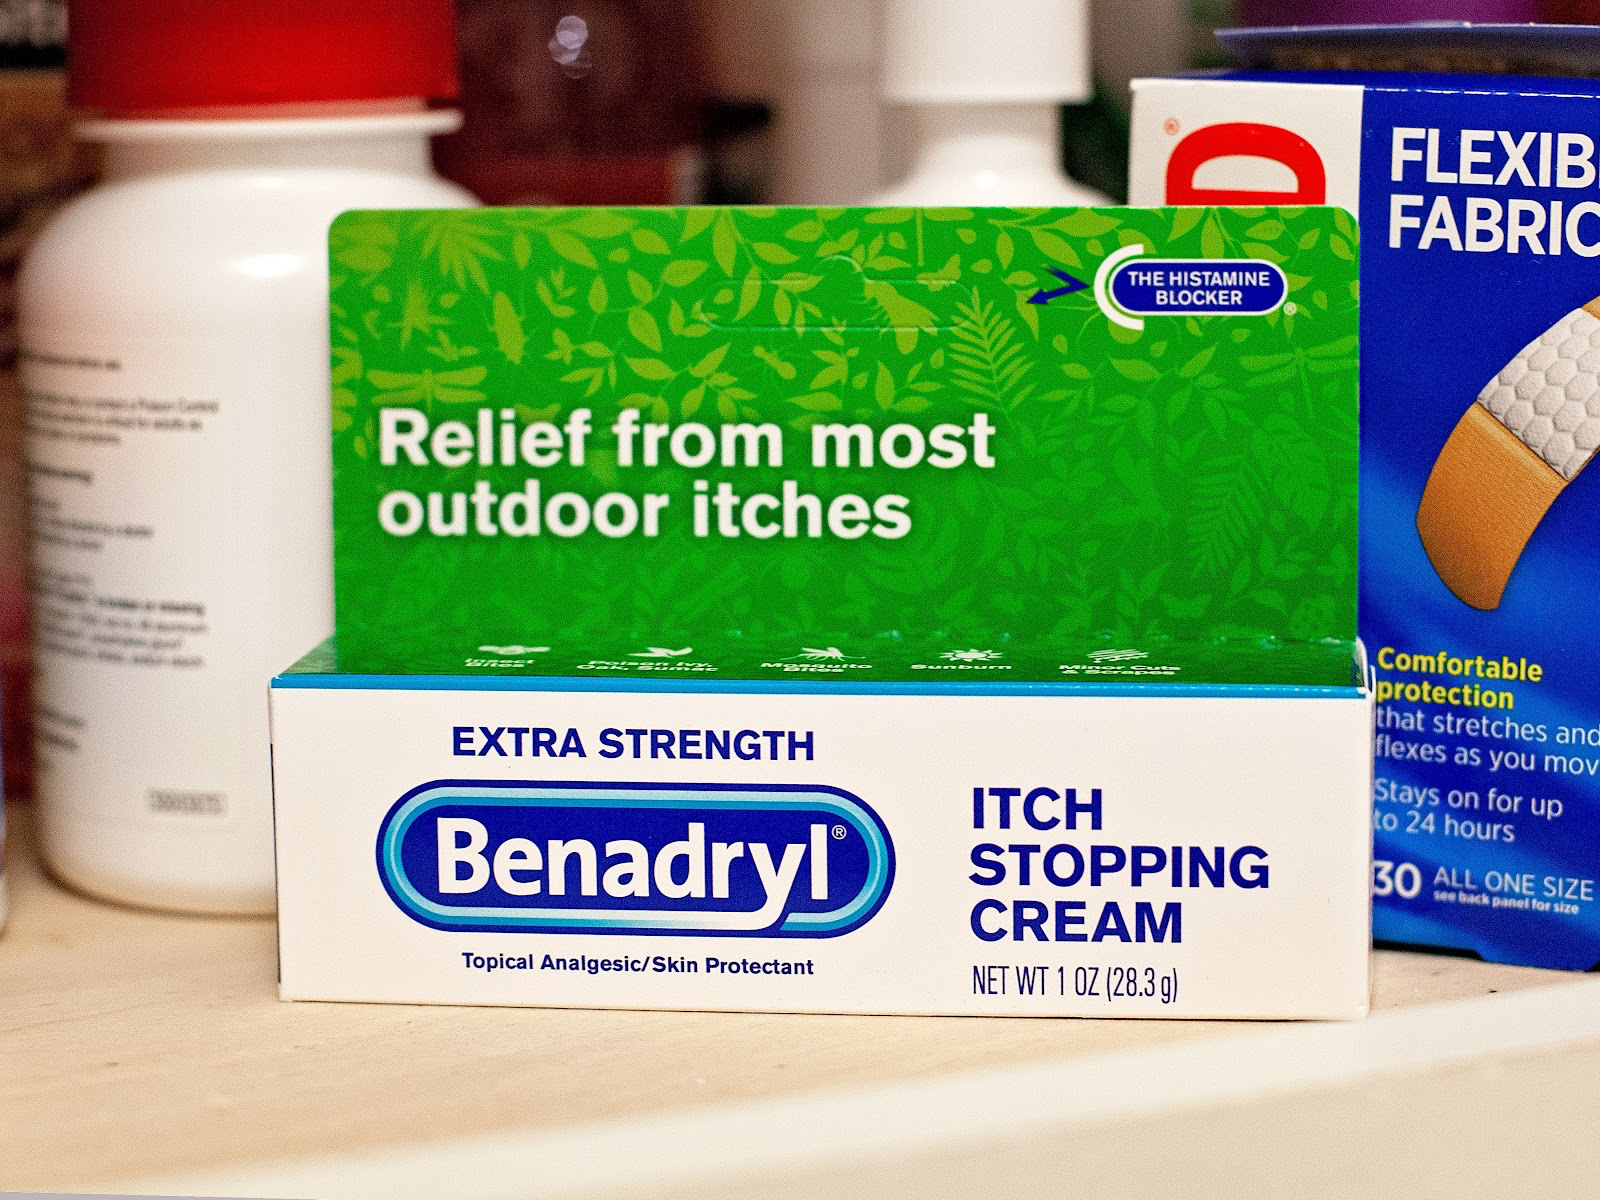 Benadryl Products As Low As $1.29 At Publix